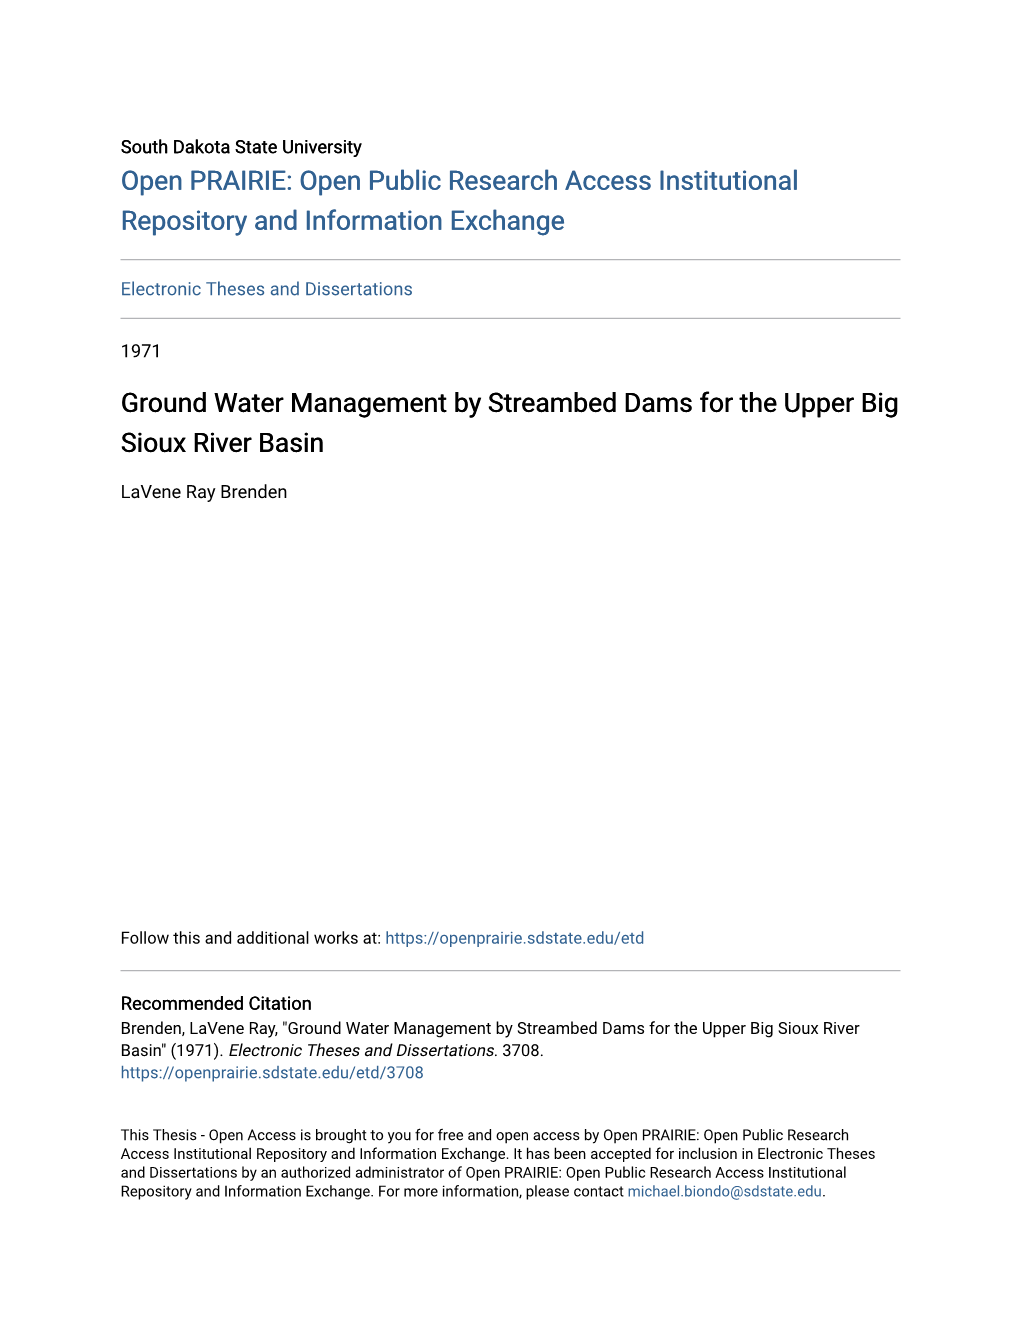 Ground Water Management by Streambed Dams for the Upper Big Sioux River Basin